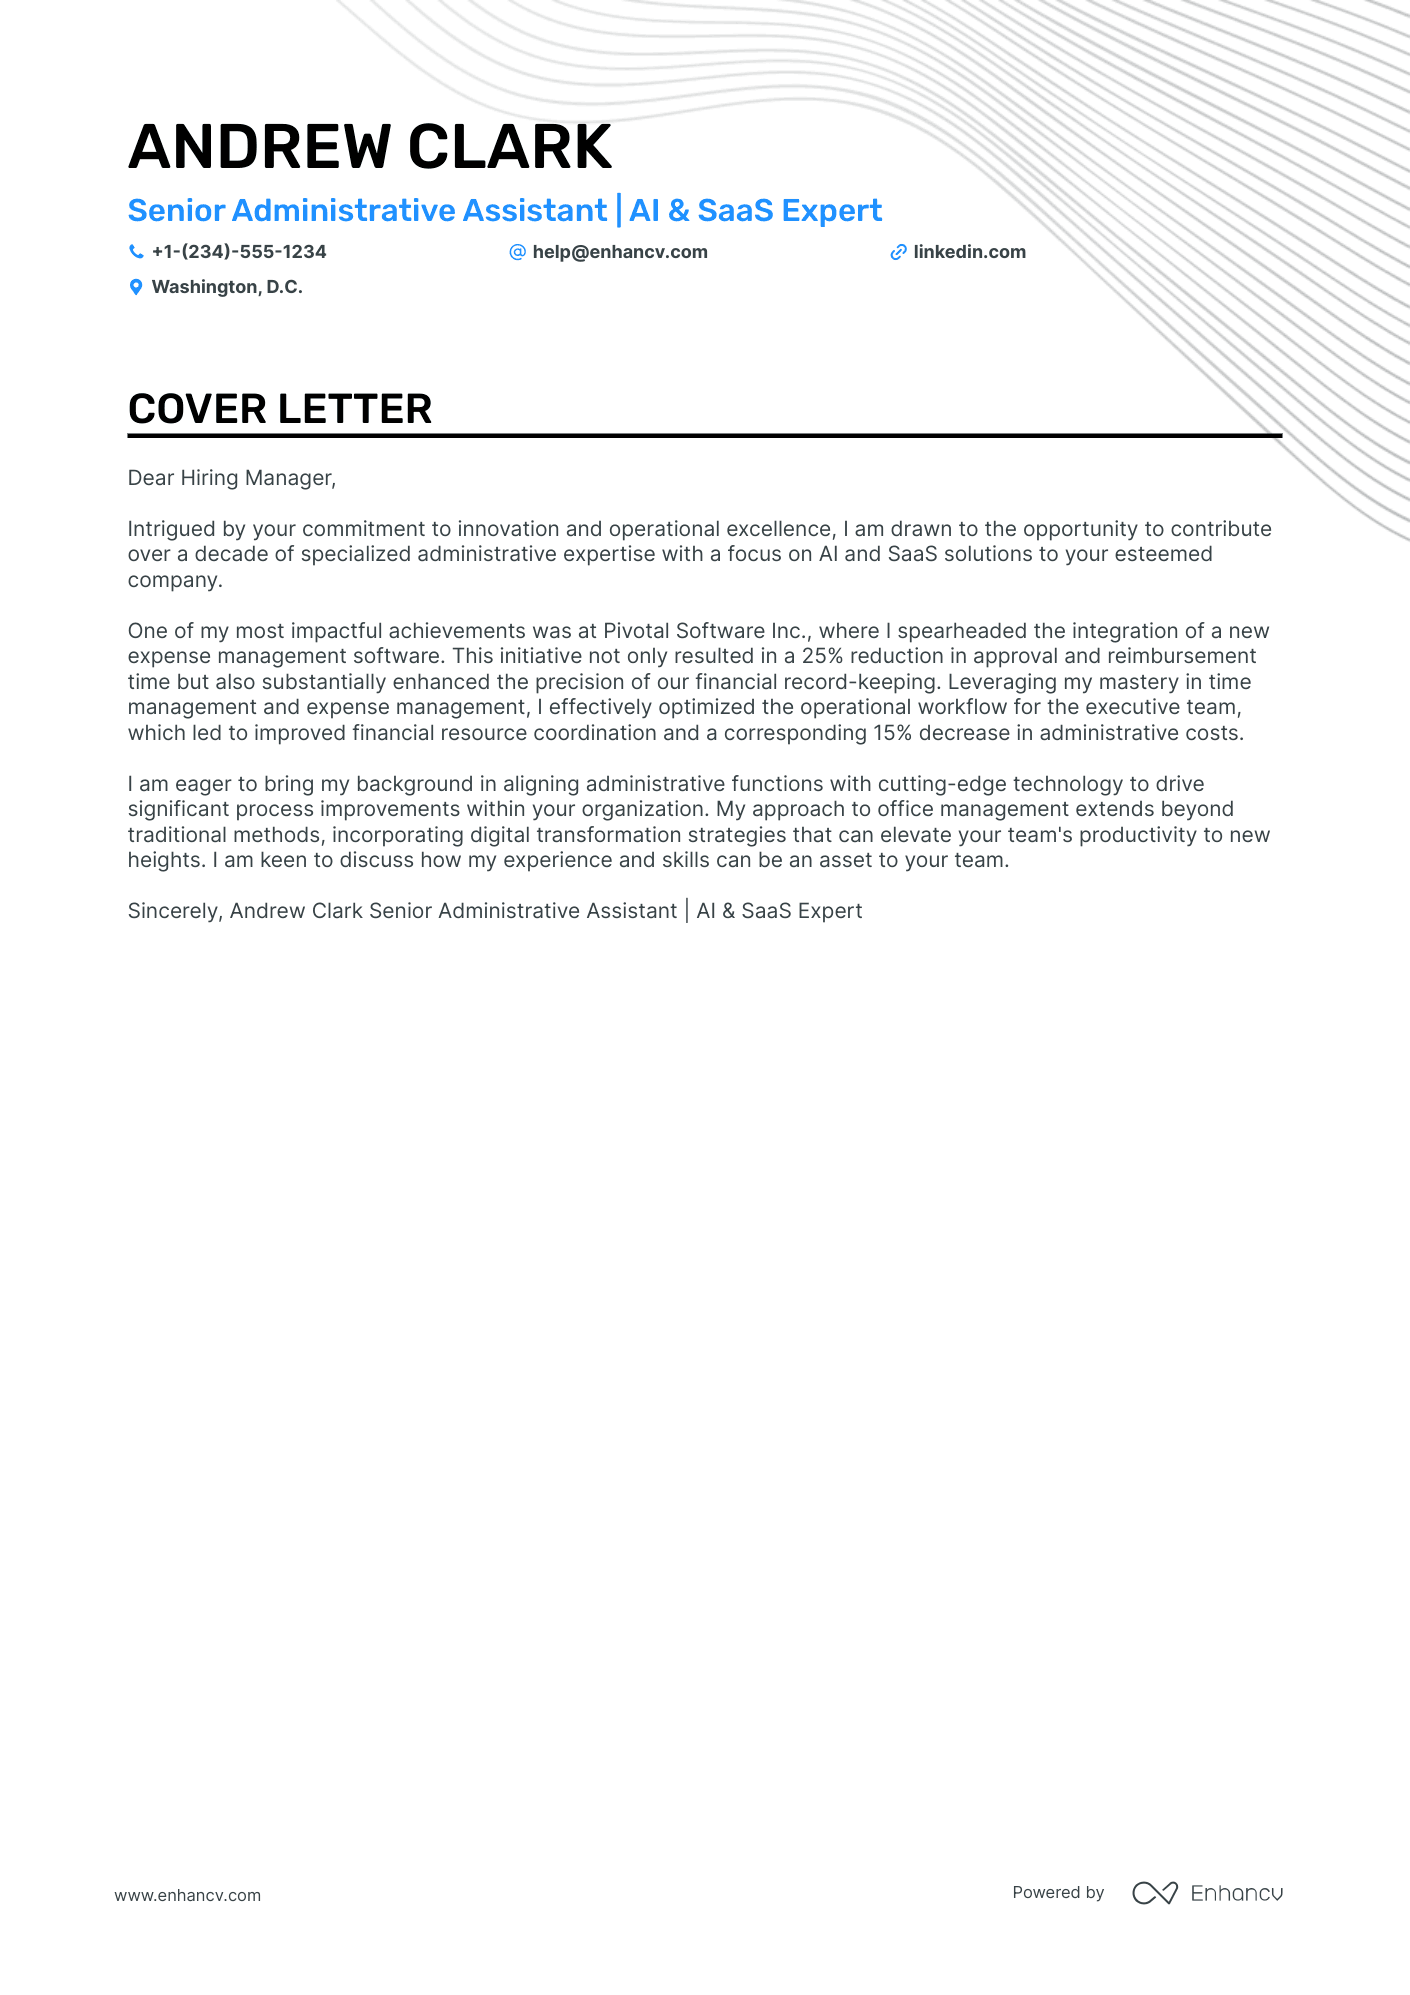 Executive Administrative Assistant cover letter